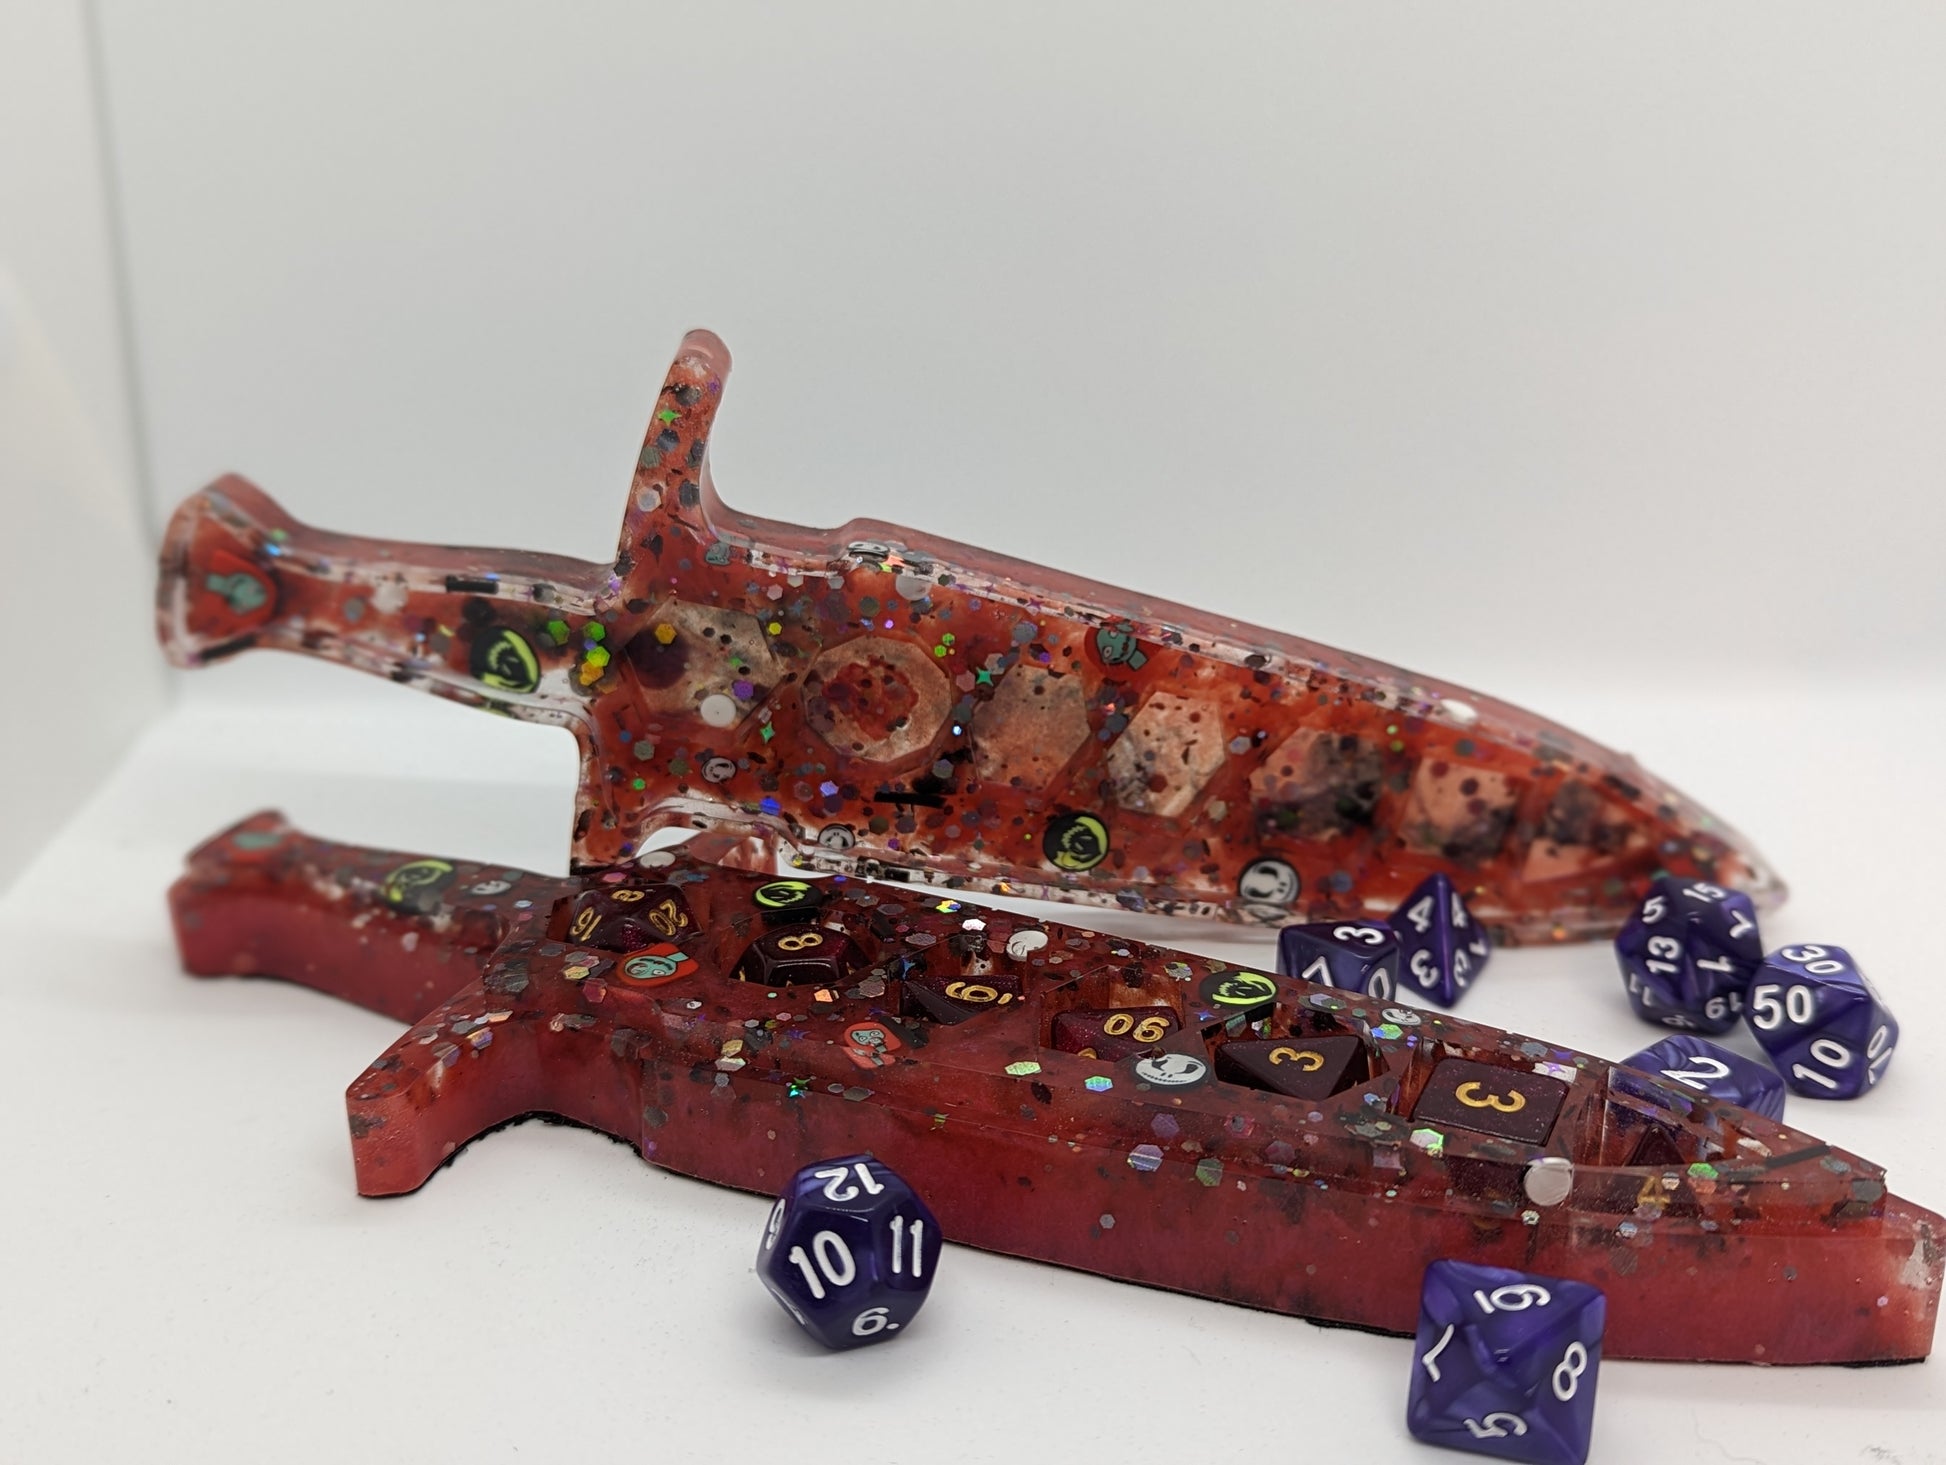 Dice Holder DaggerROLLIN! ROLLIN! ROLLIN ON THE RIVER! Or rather rolling at your DM table... with these custom ordered dice holder daggers. This sharp stabby comes complete with balanWitchin Waifu